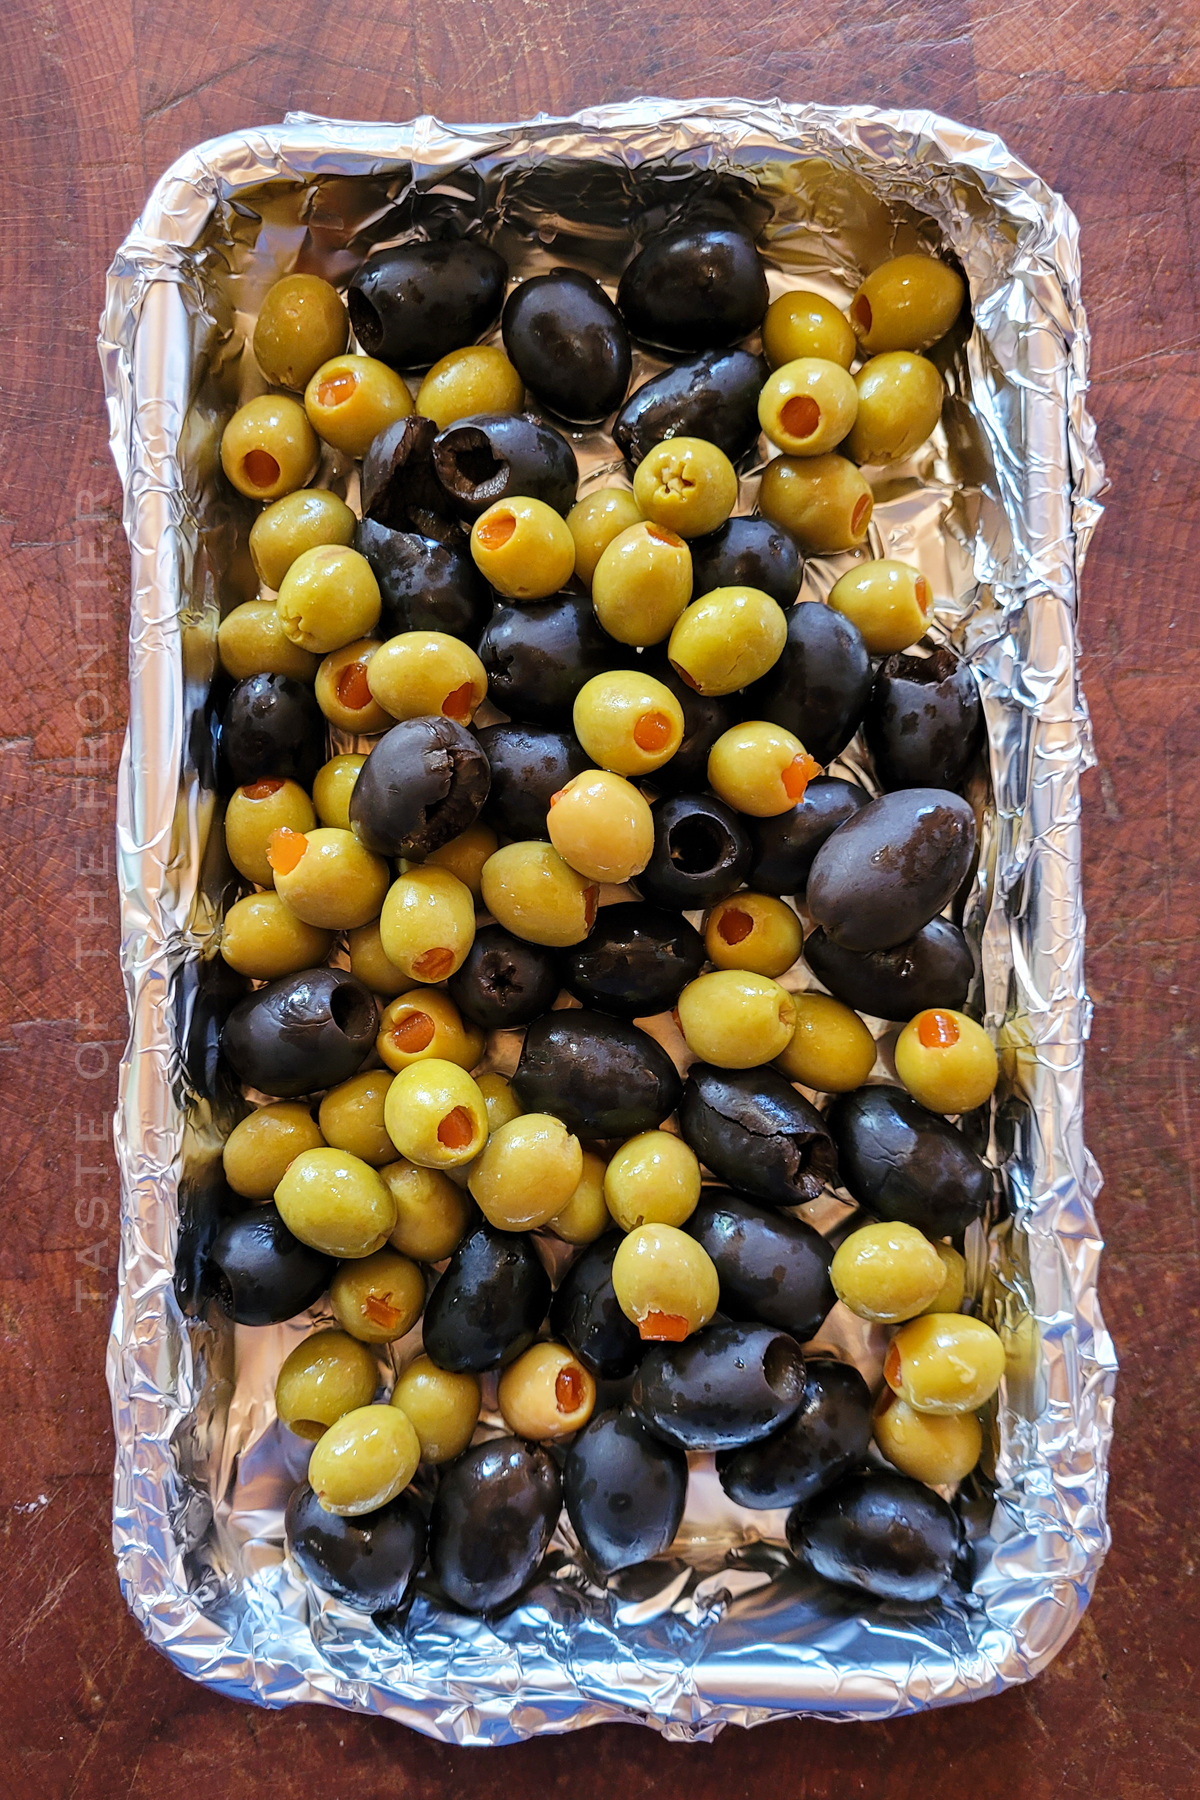 Ingredients for Smoked Olives